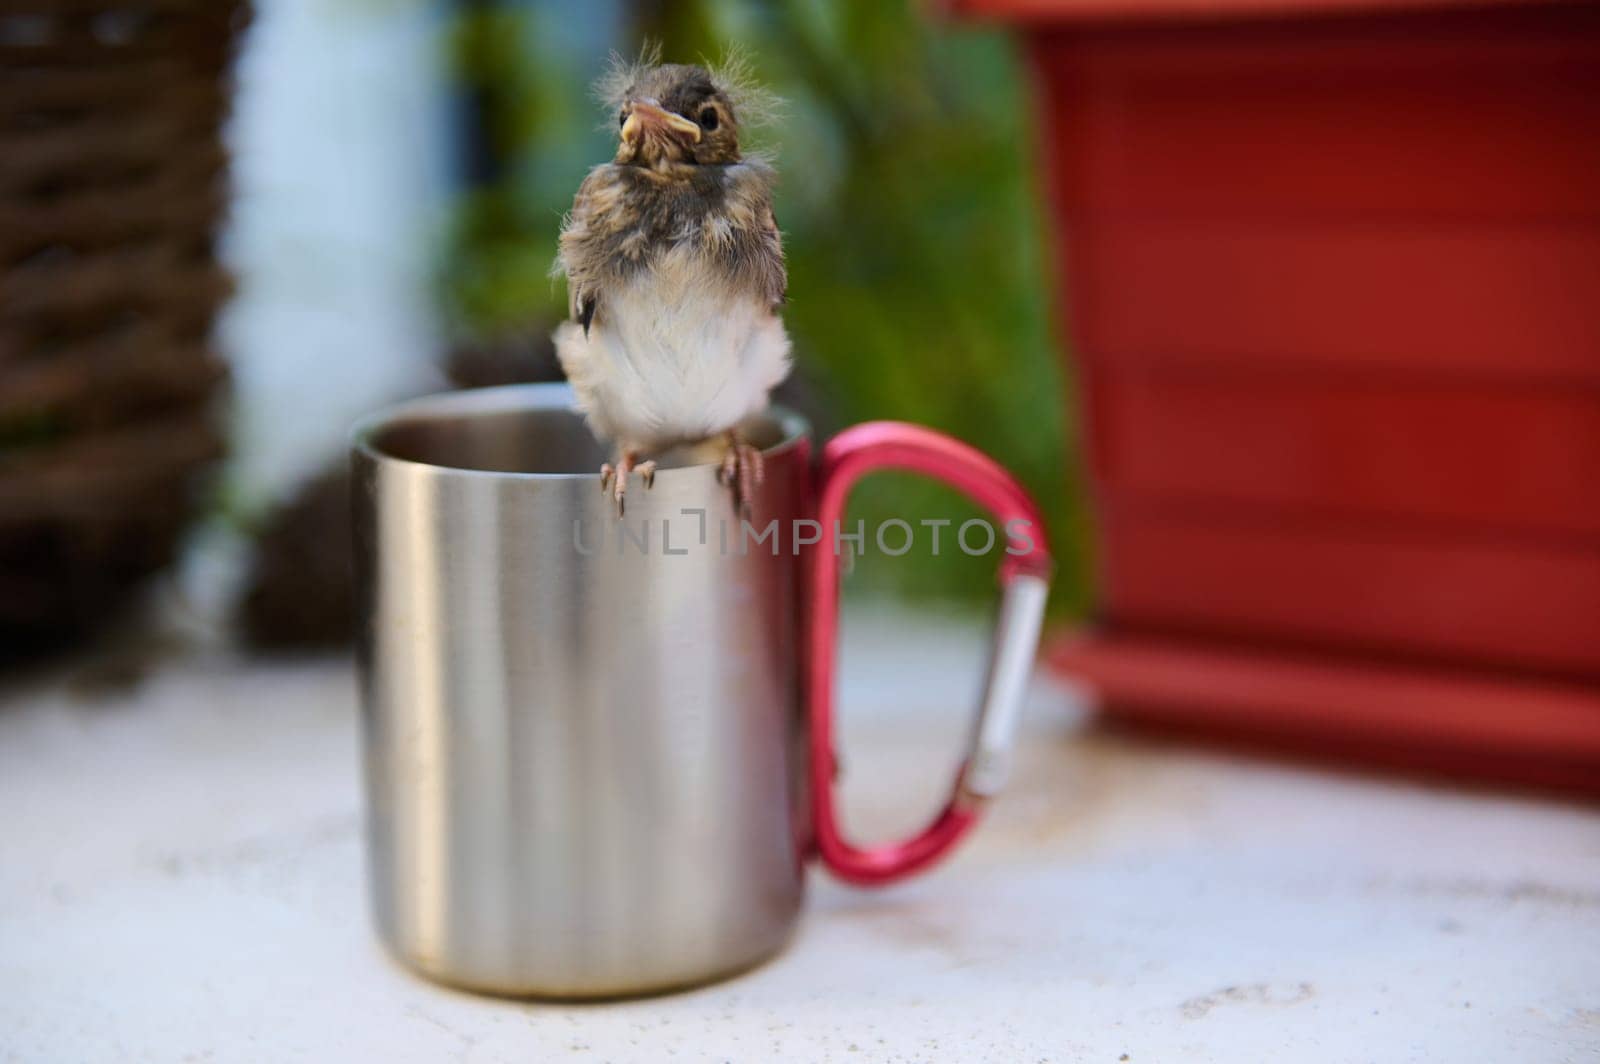 Birds in nature. Animals themes. Cute baby bird sitting on stainless steel travel mug between a wicker basket and pots with flowers outdoors